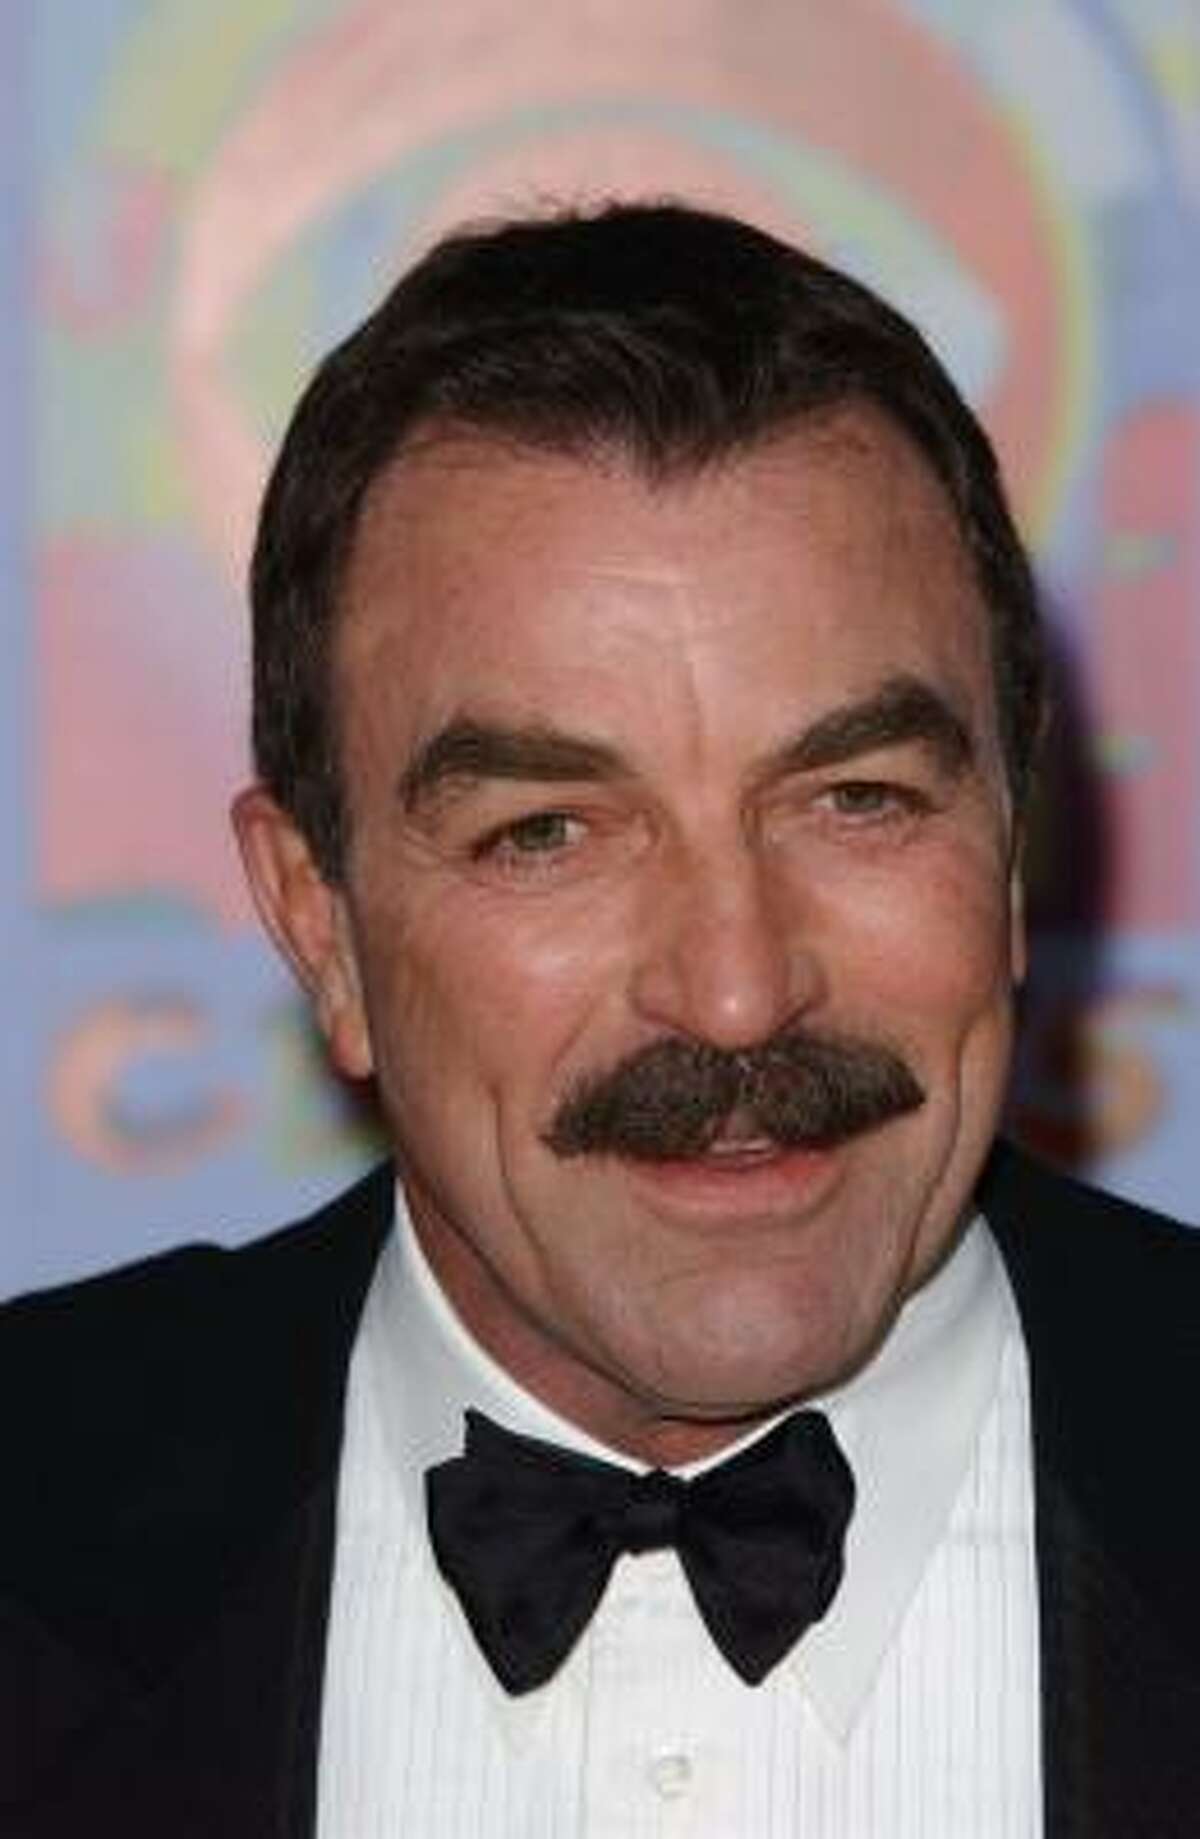 Celebrity mustaches: The good, the bad and the ugly